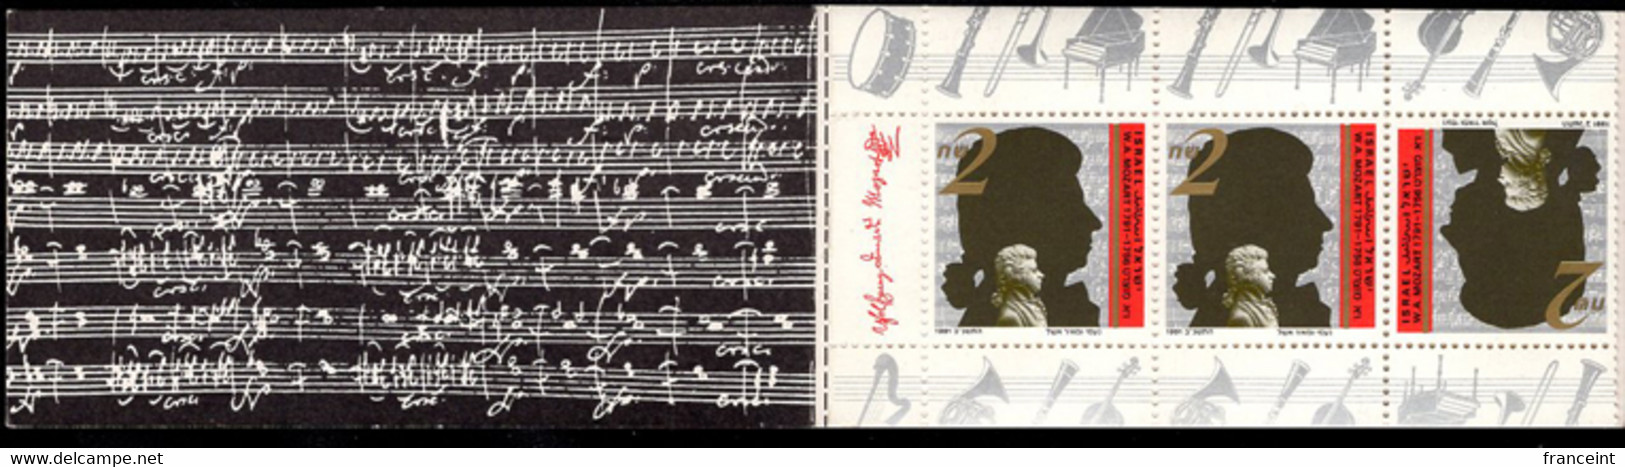 ISRAEL(1991) Mozart. Booklet Of 4 Stamps With Score From Don Giovanni On Inside Cover. - Booklets